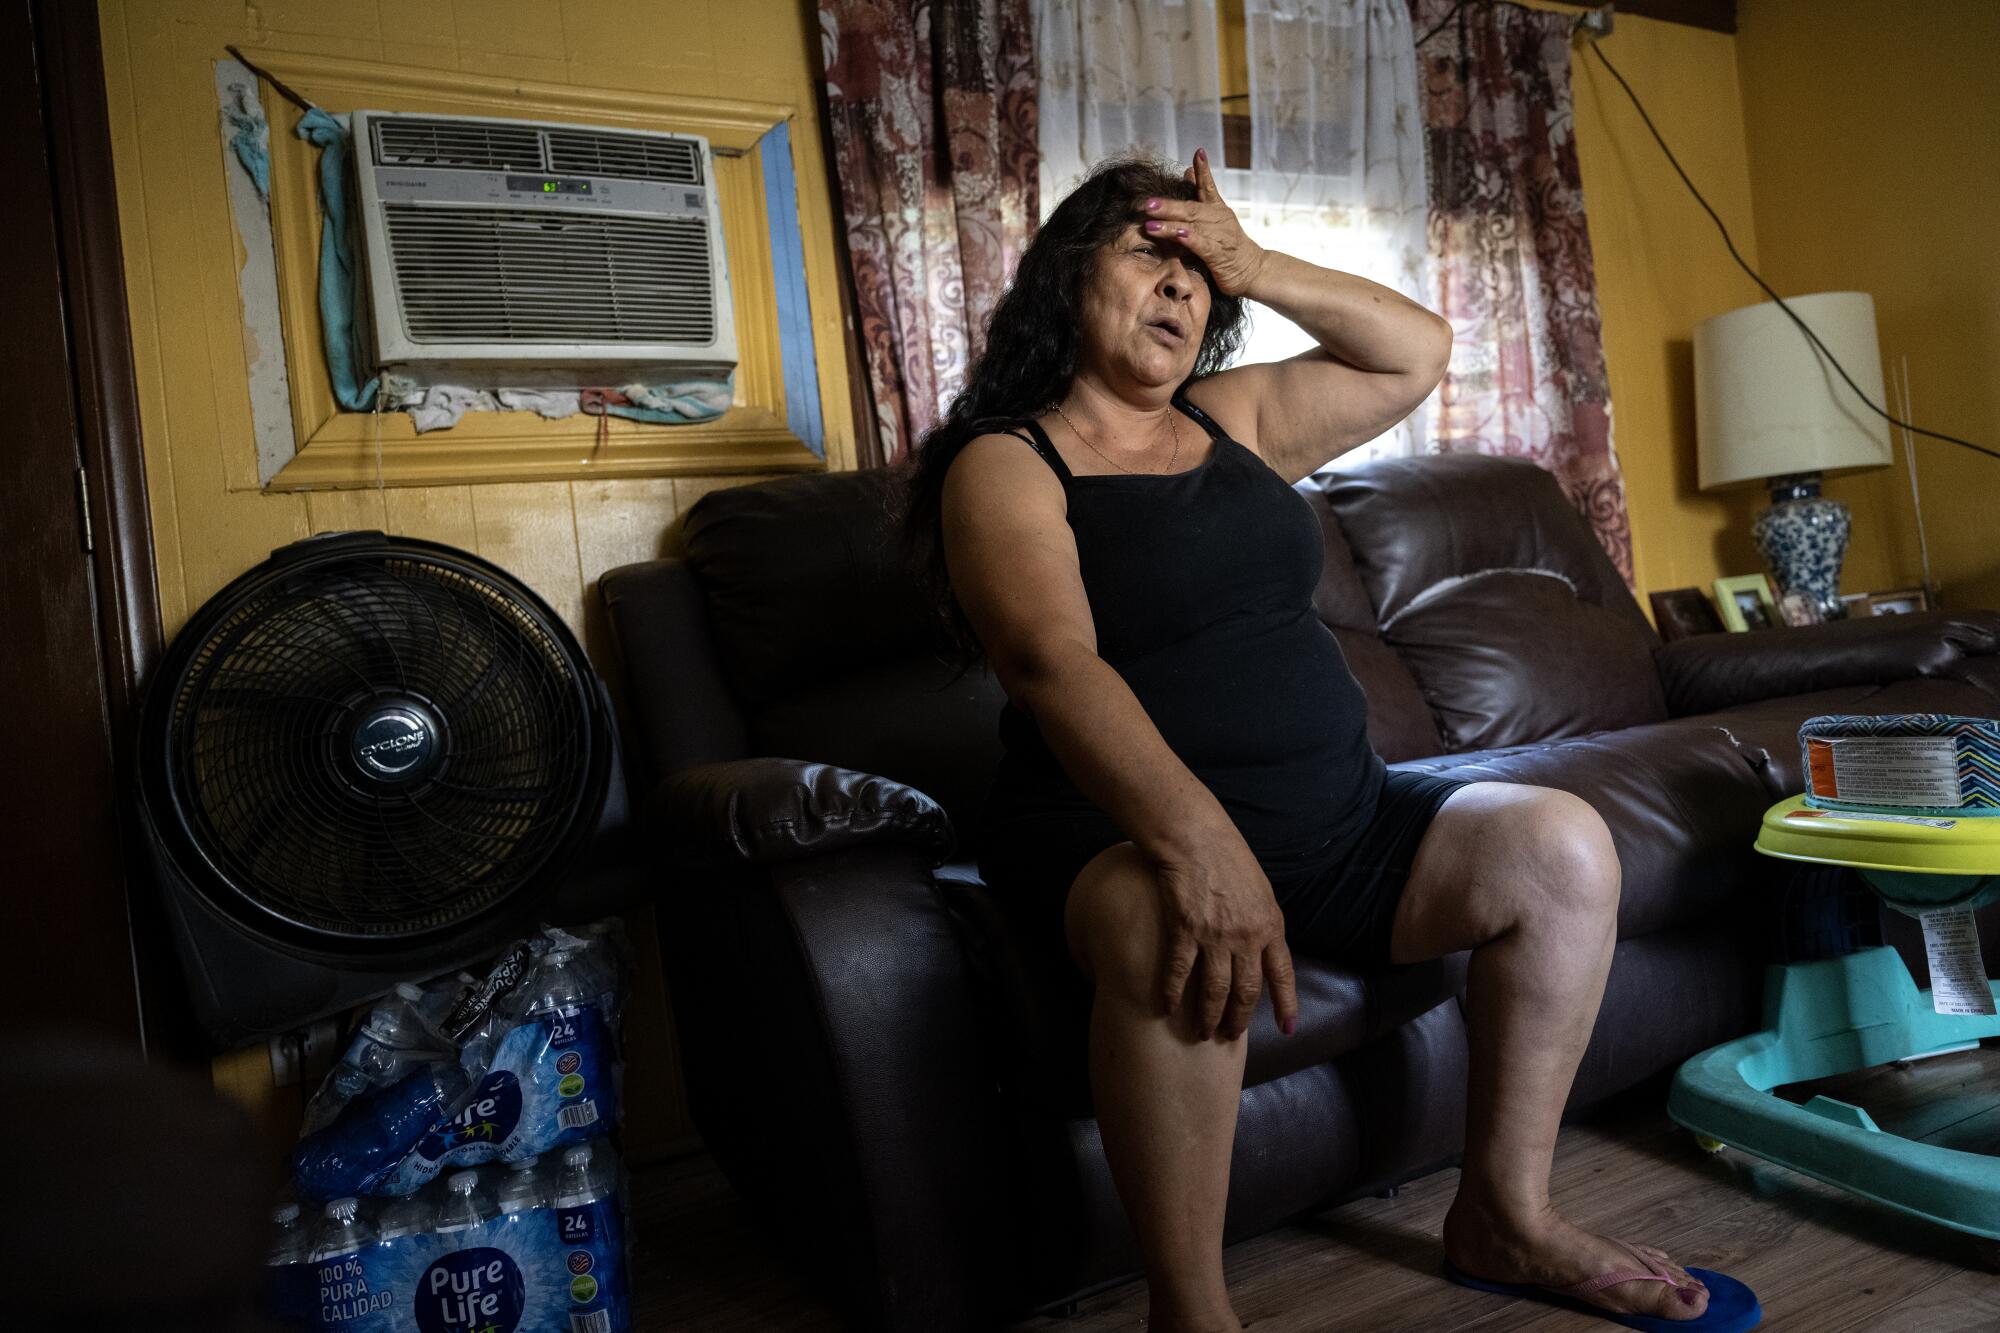 Leticia Jimenez wipes sweat from her forehead during extreme heat in her home.